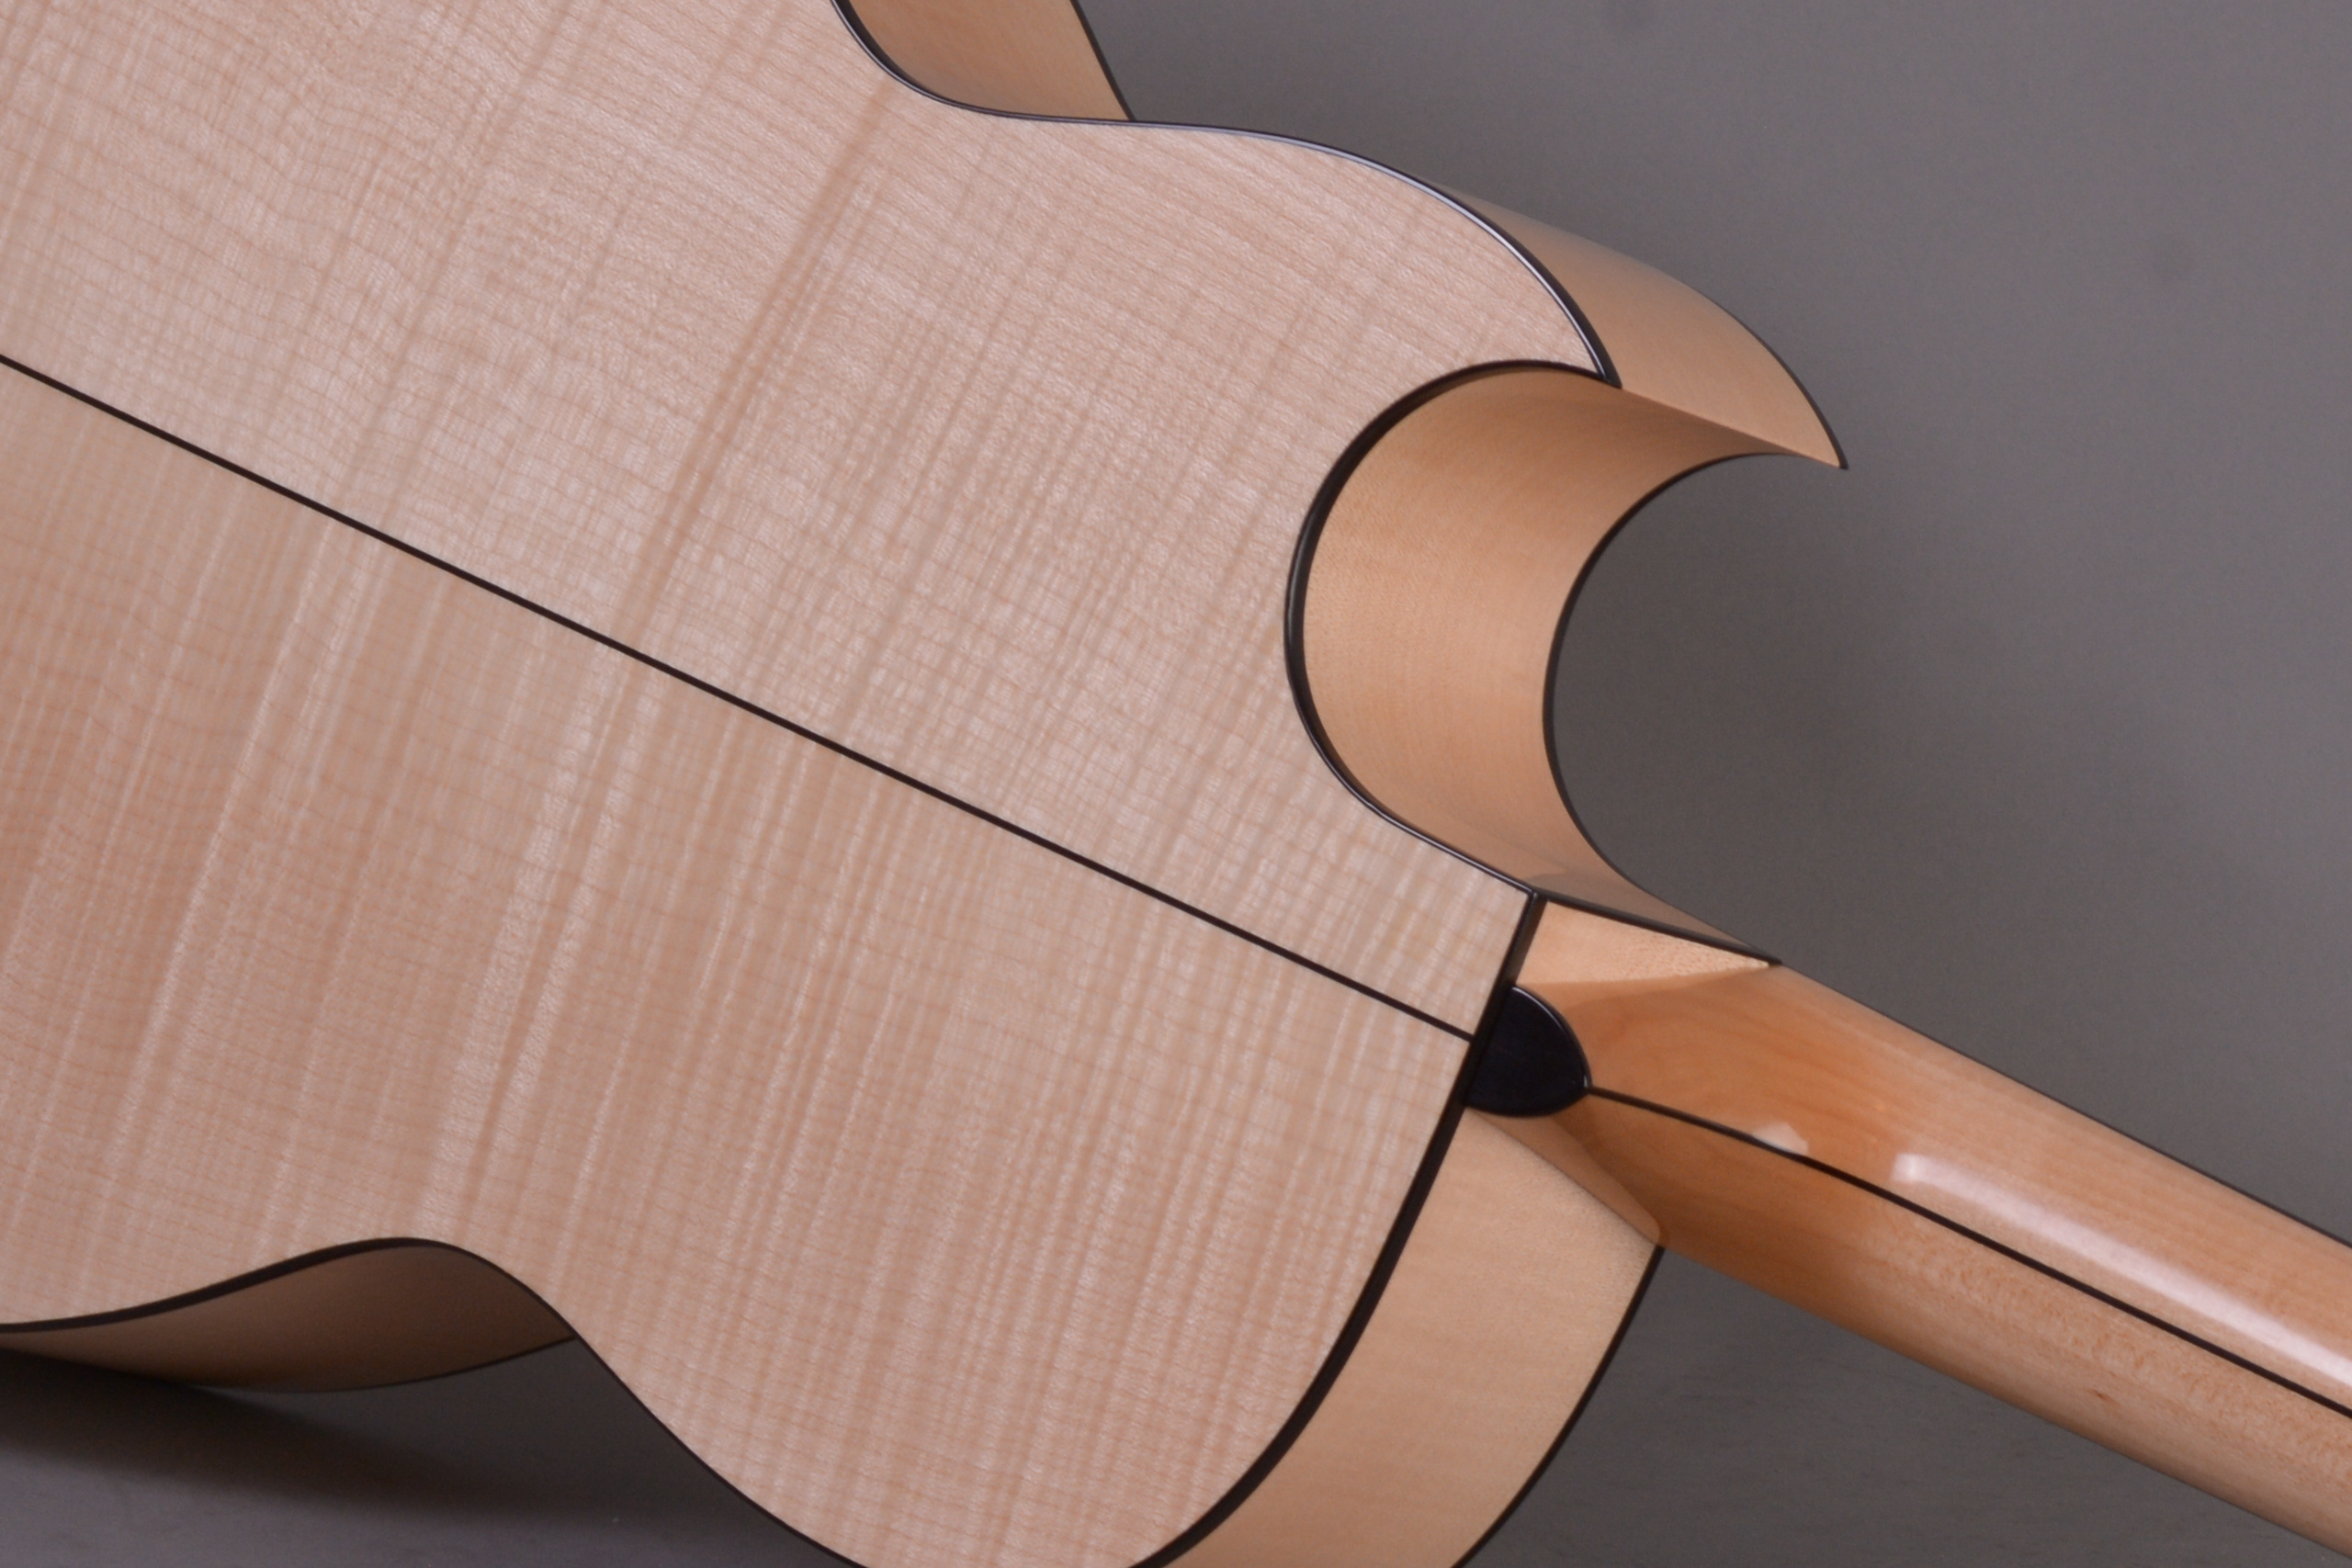 custom guitar with cut-away section